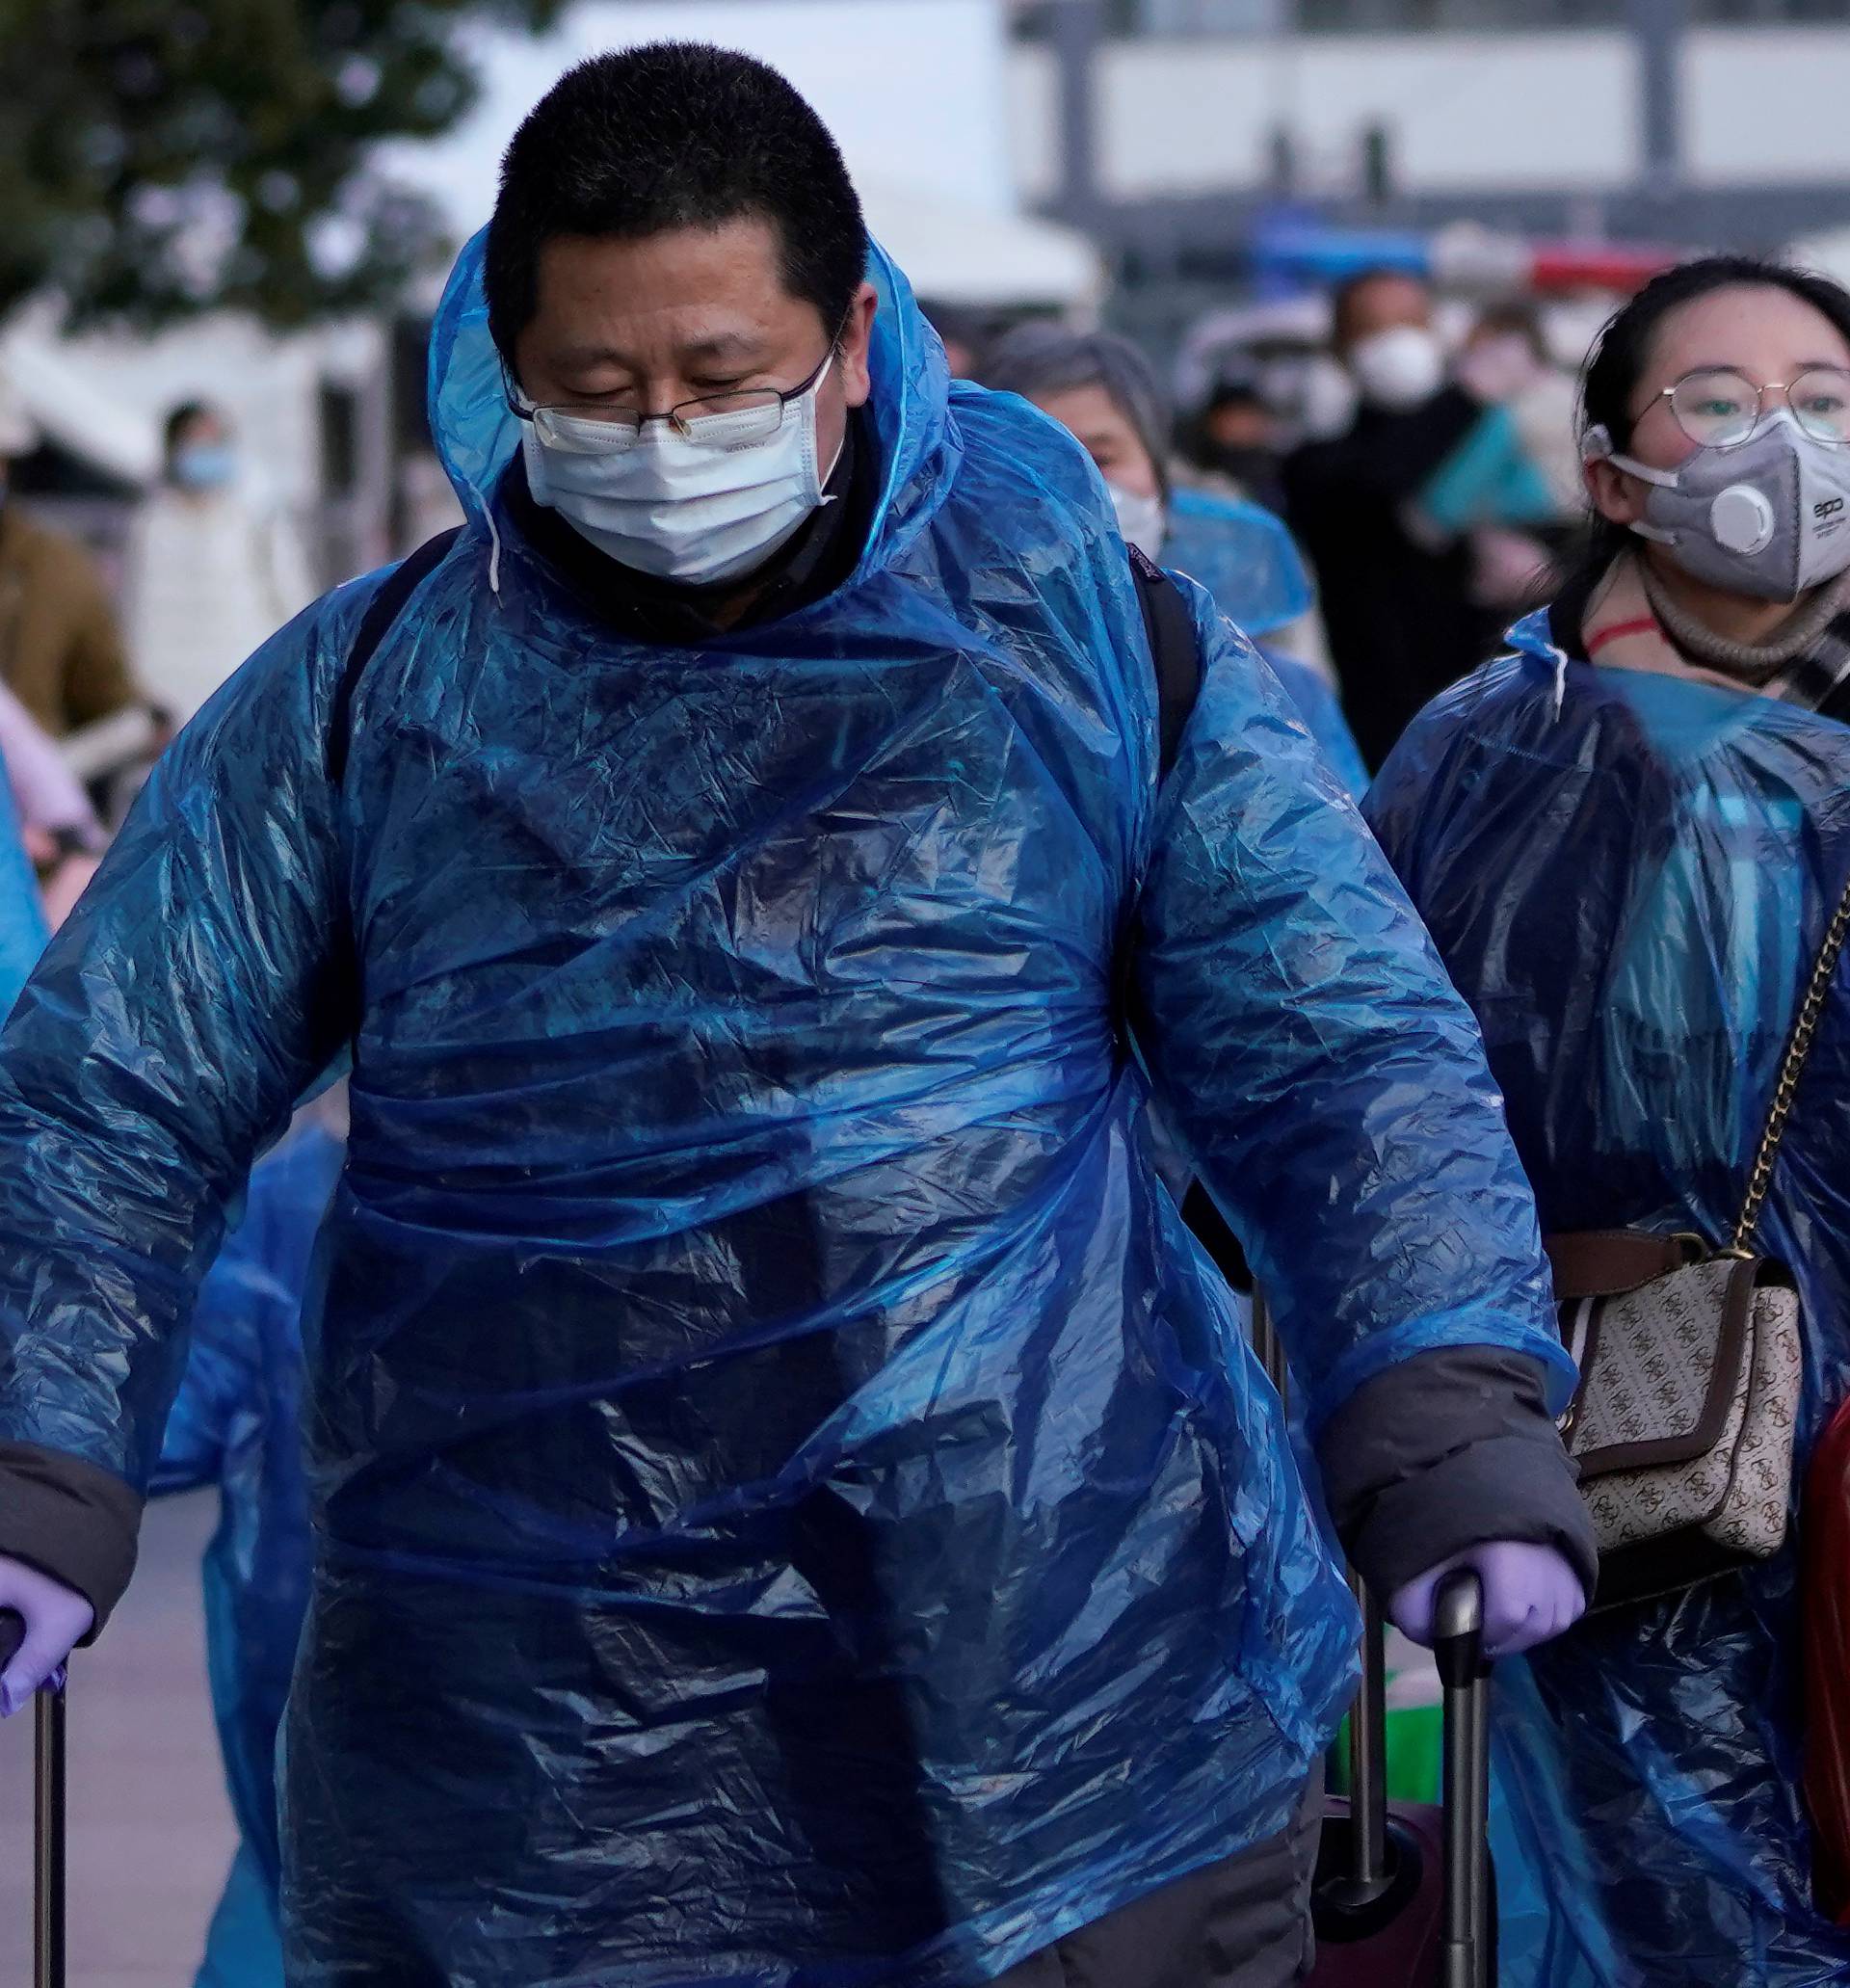 People wear face masks and plastic raincoats as a protection from coronavirus in Shanghai